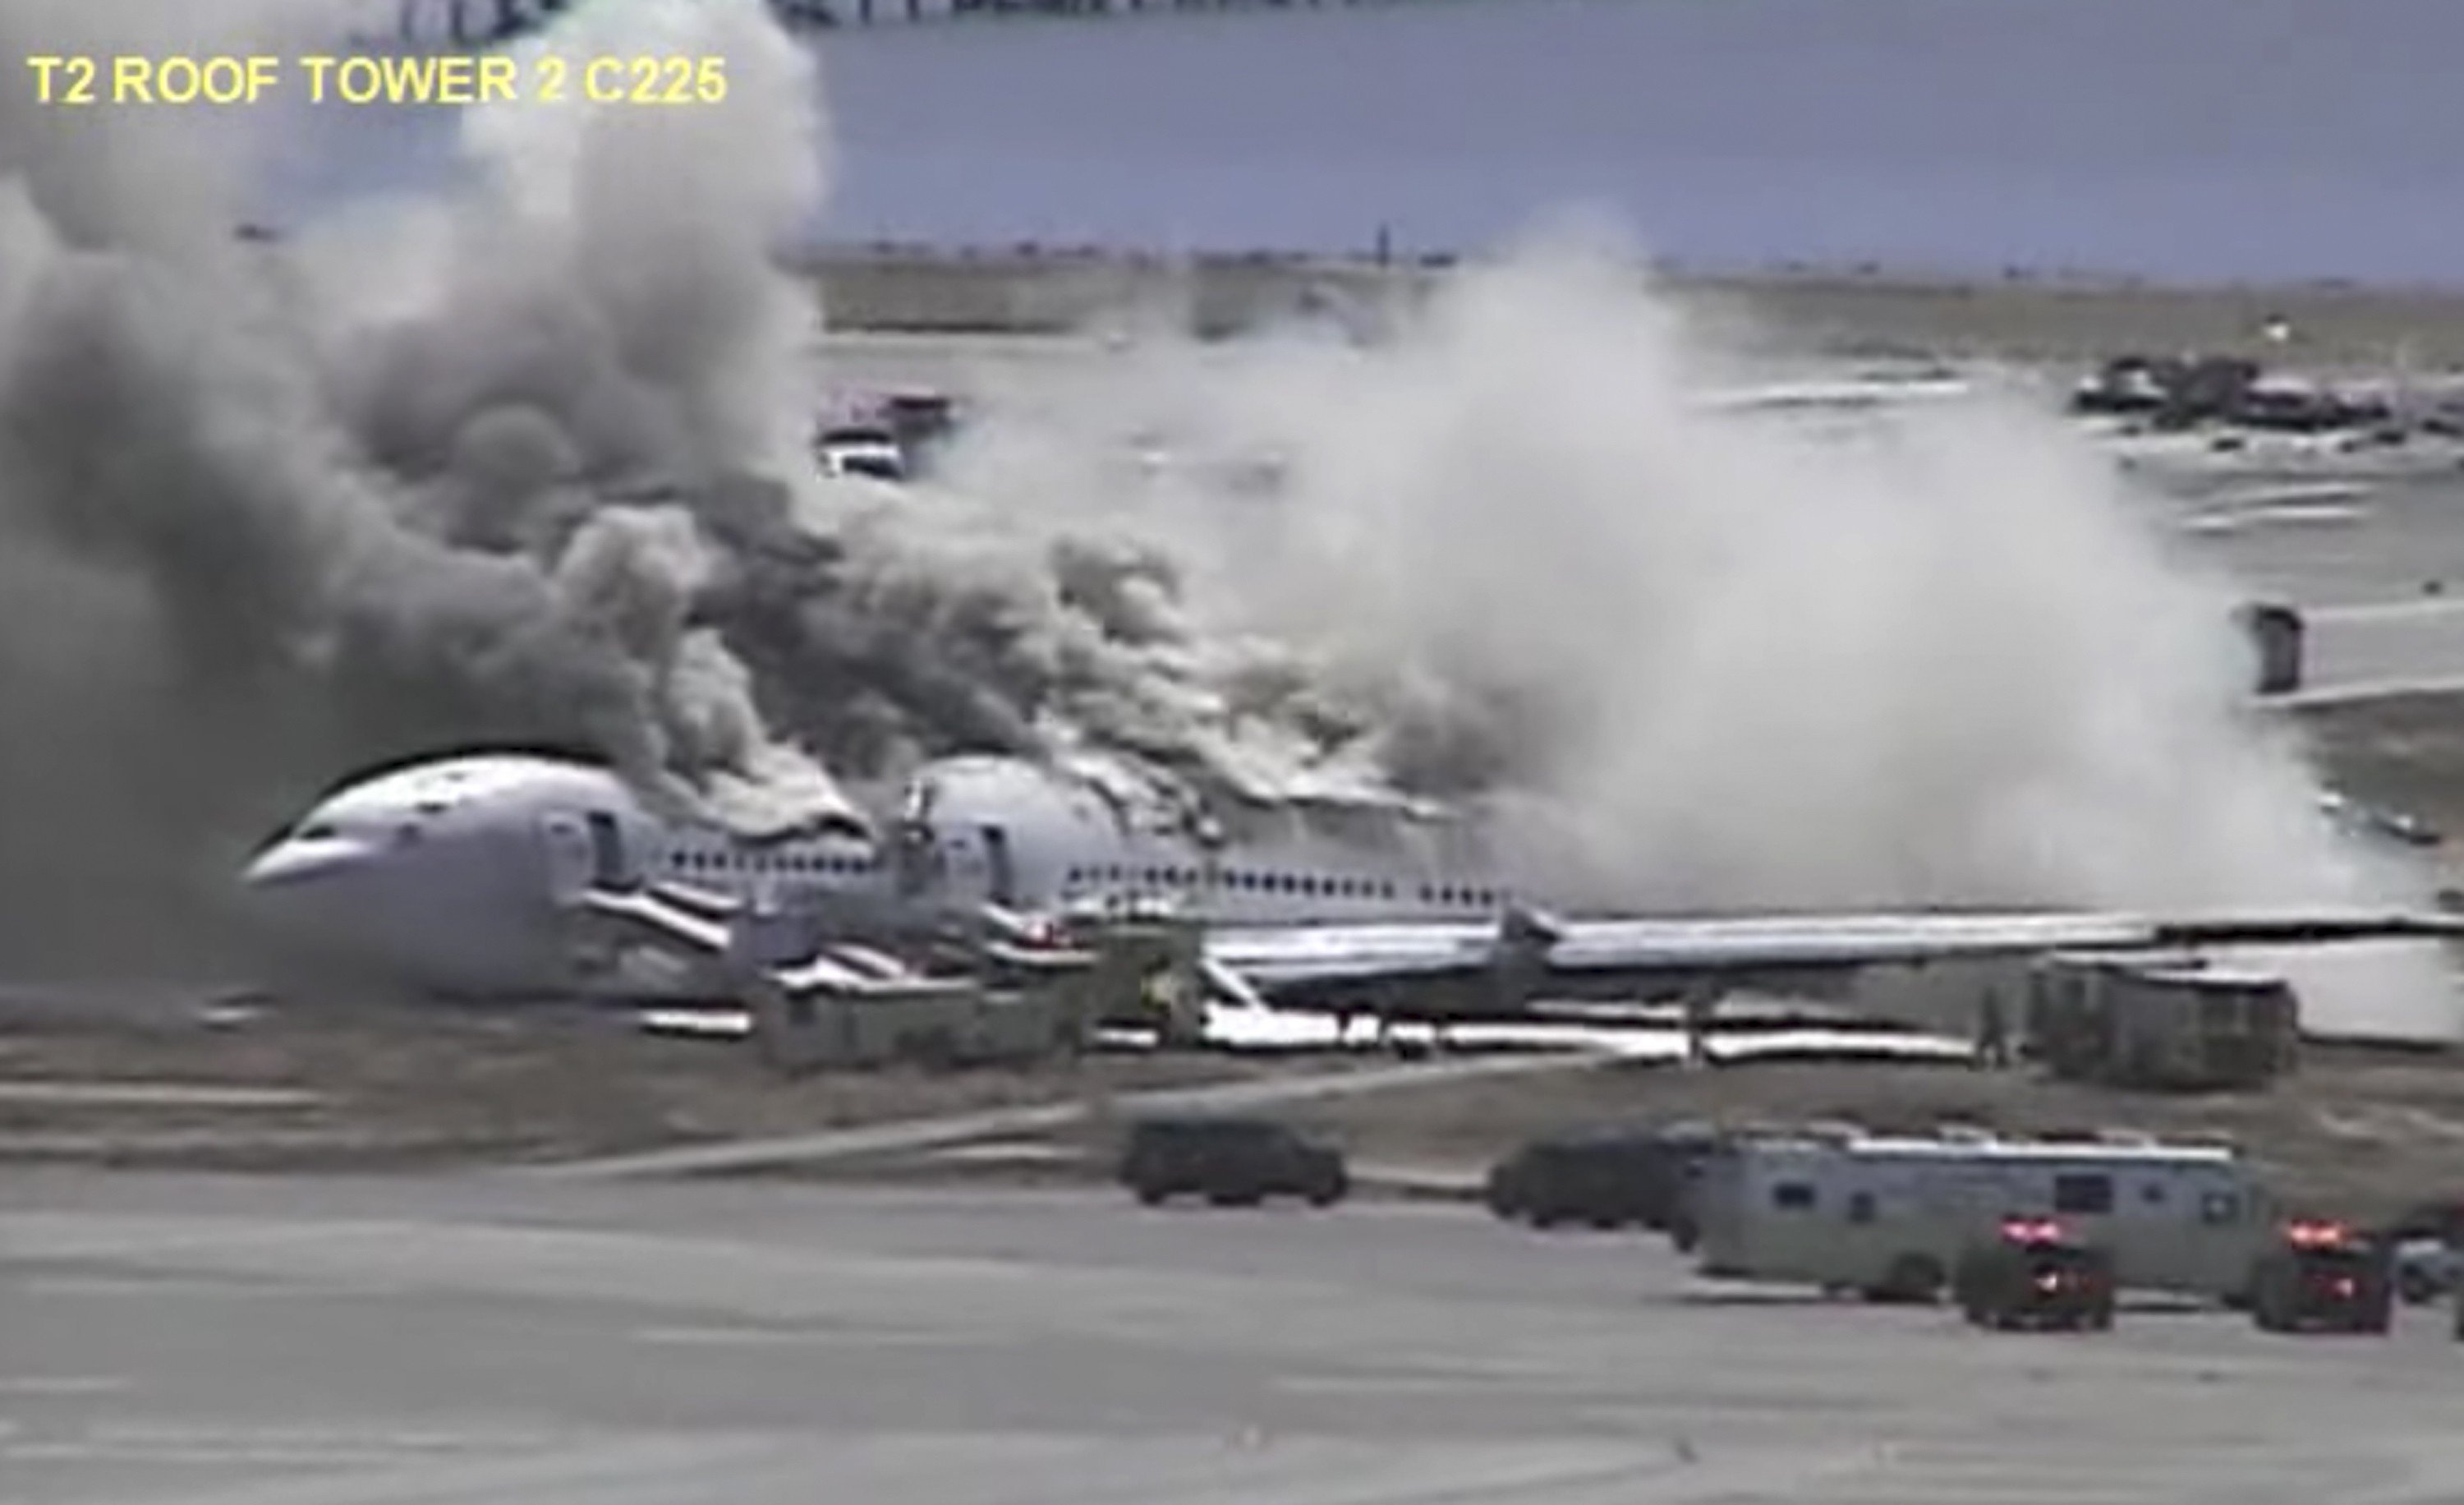 This July 6, 2013, image made from a leaked San Francisco International Airport video shows Asiana flight 214 after it crashed at the airport in San Francisco. Photo: AP / YouTube